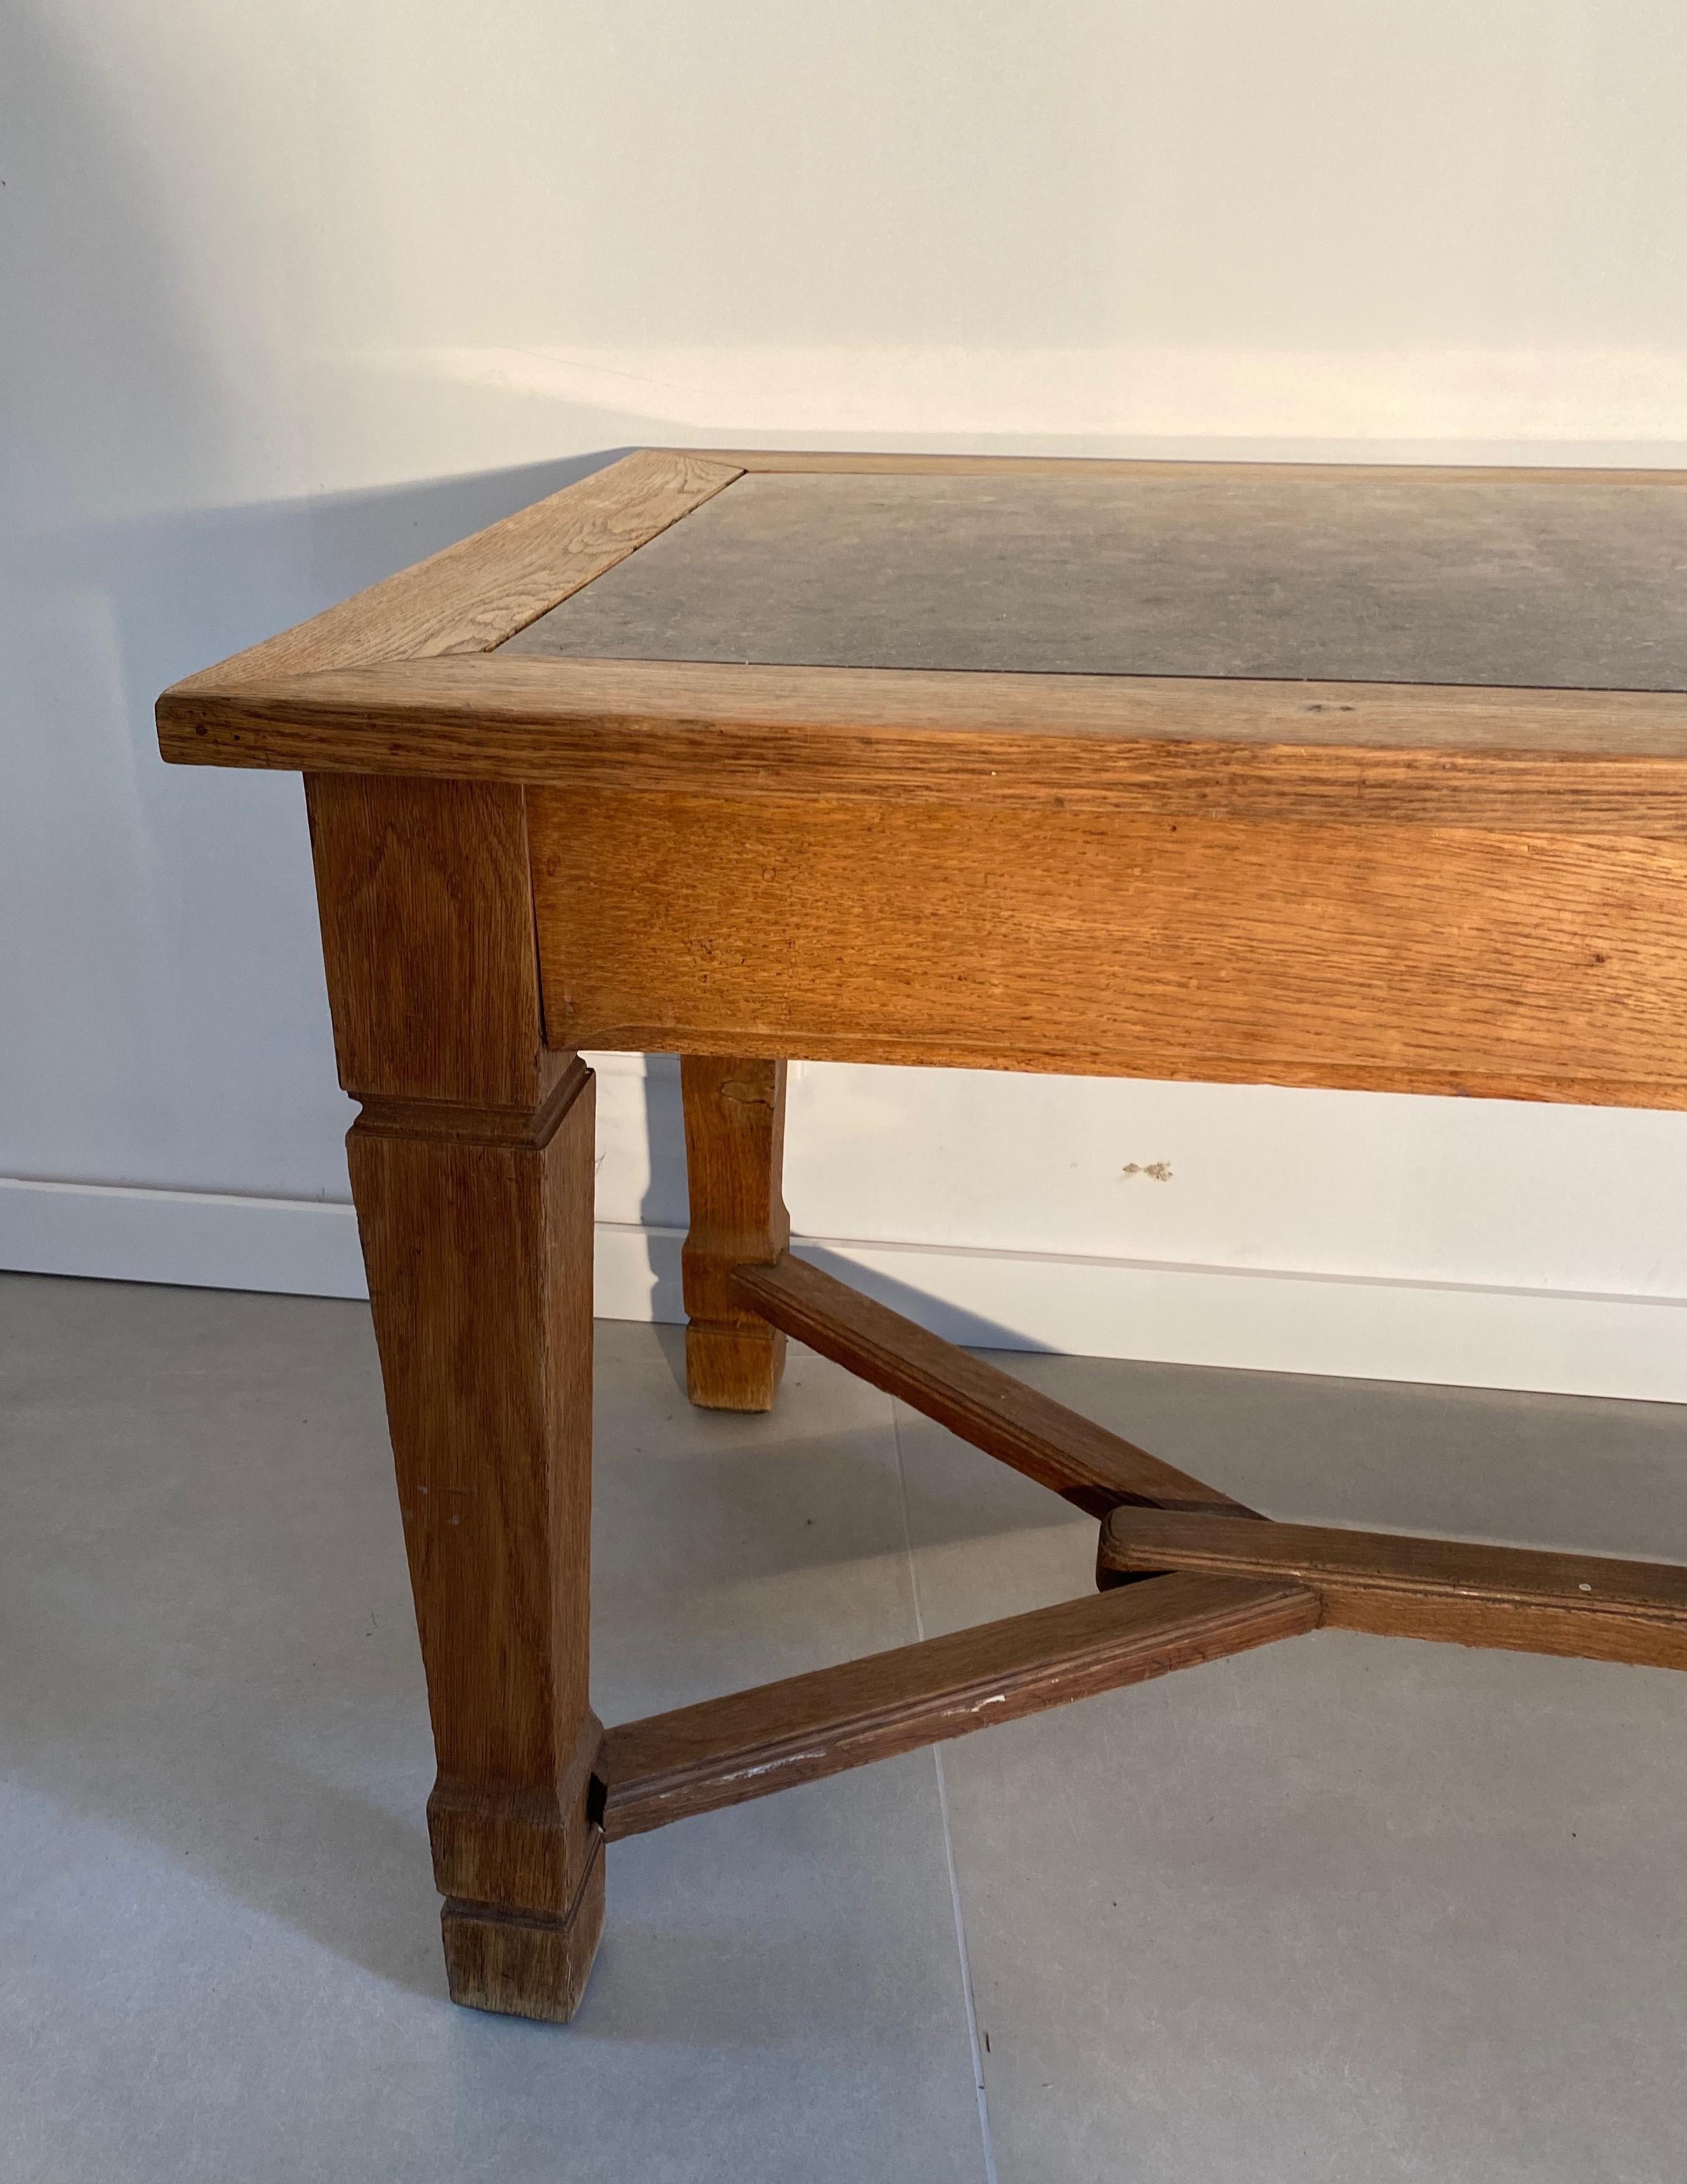 Late 19th Century Large Monastery Dinning Table Made of Oak with a Blue Stone Top, French